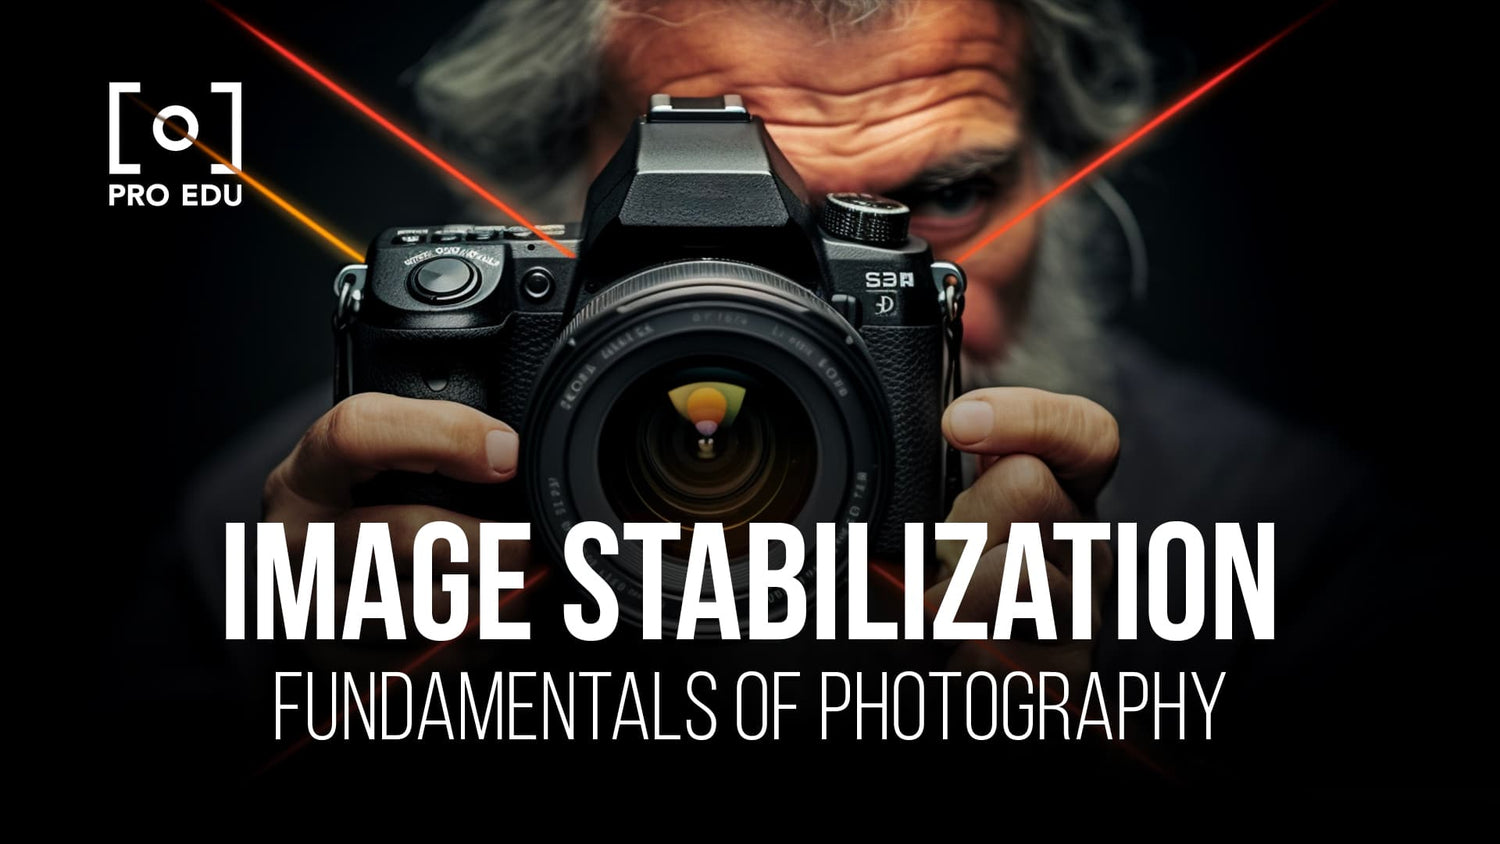 Capturing steady shots with image stabilization techniques in photography